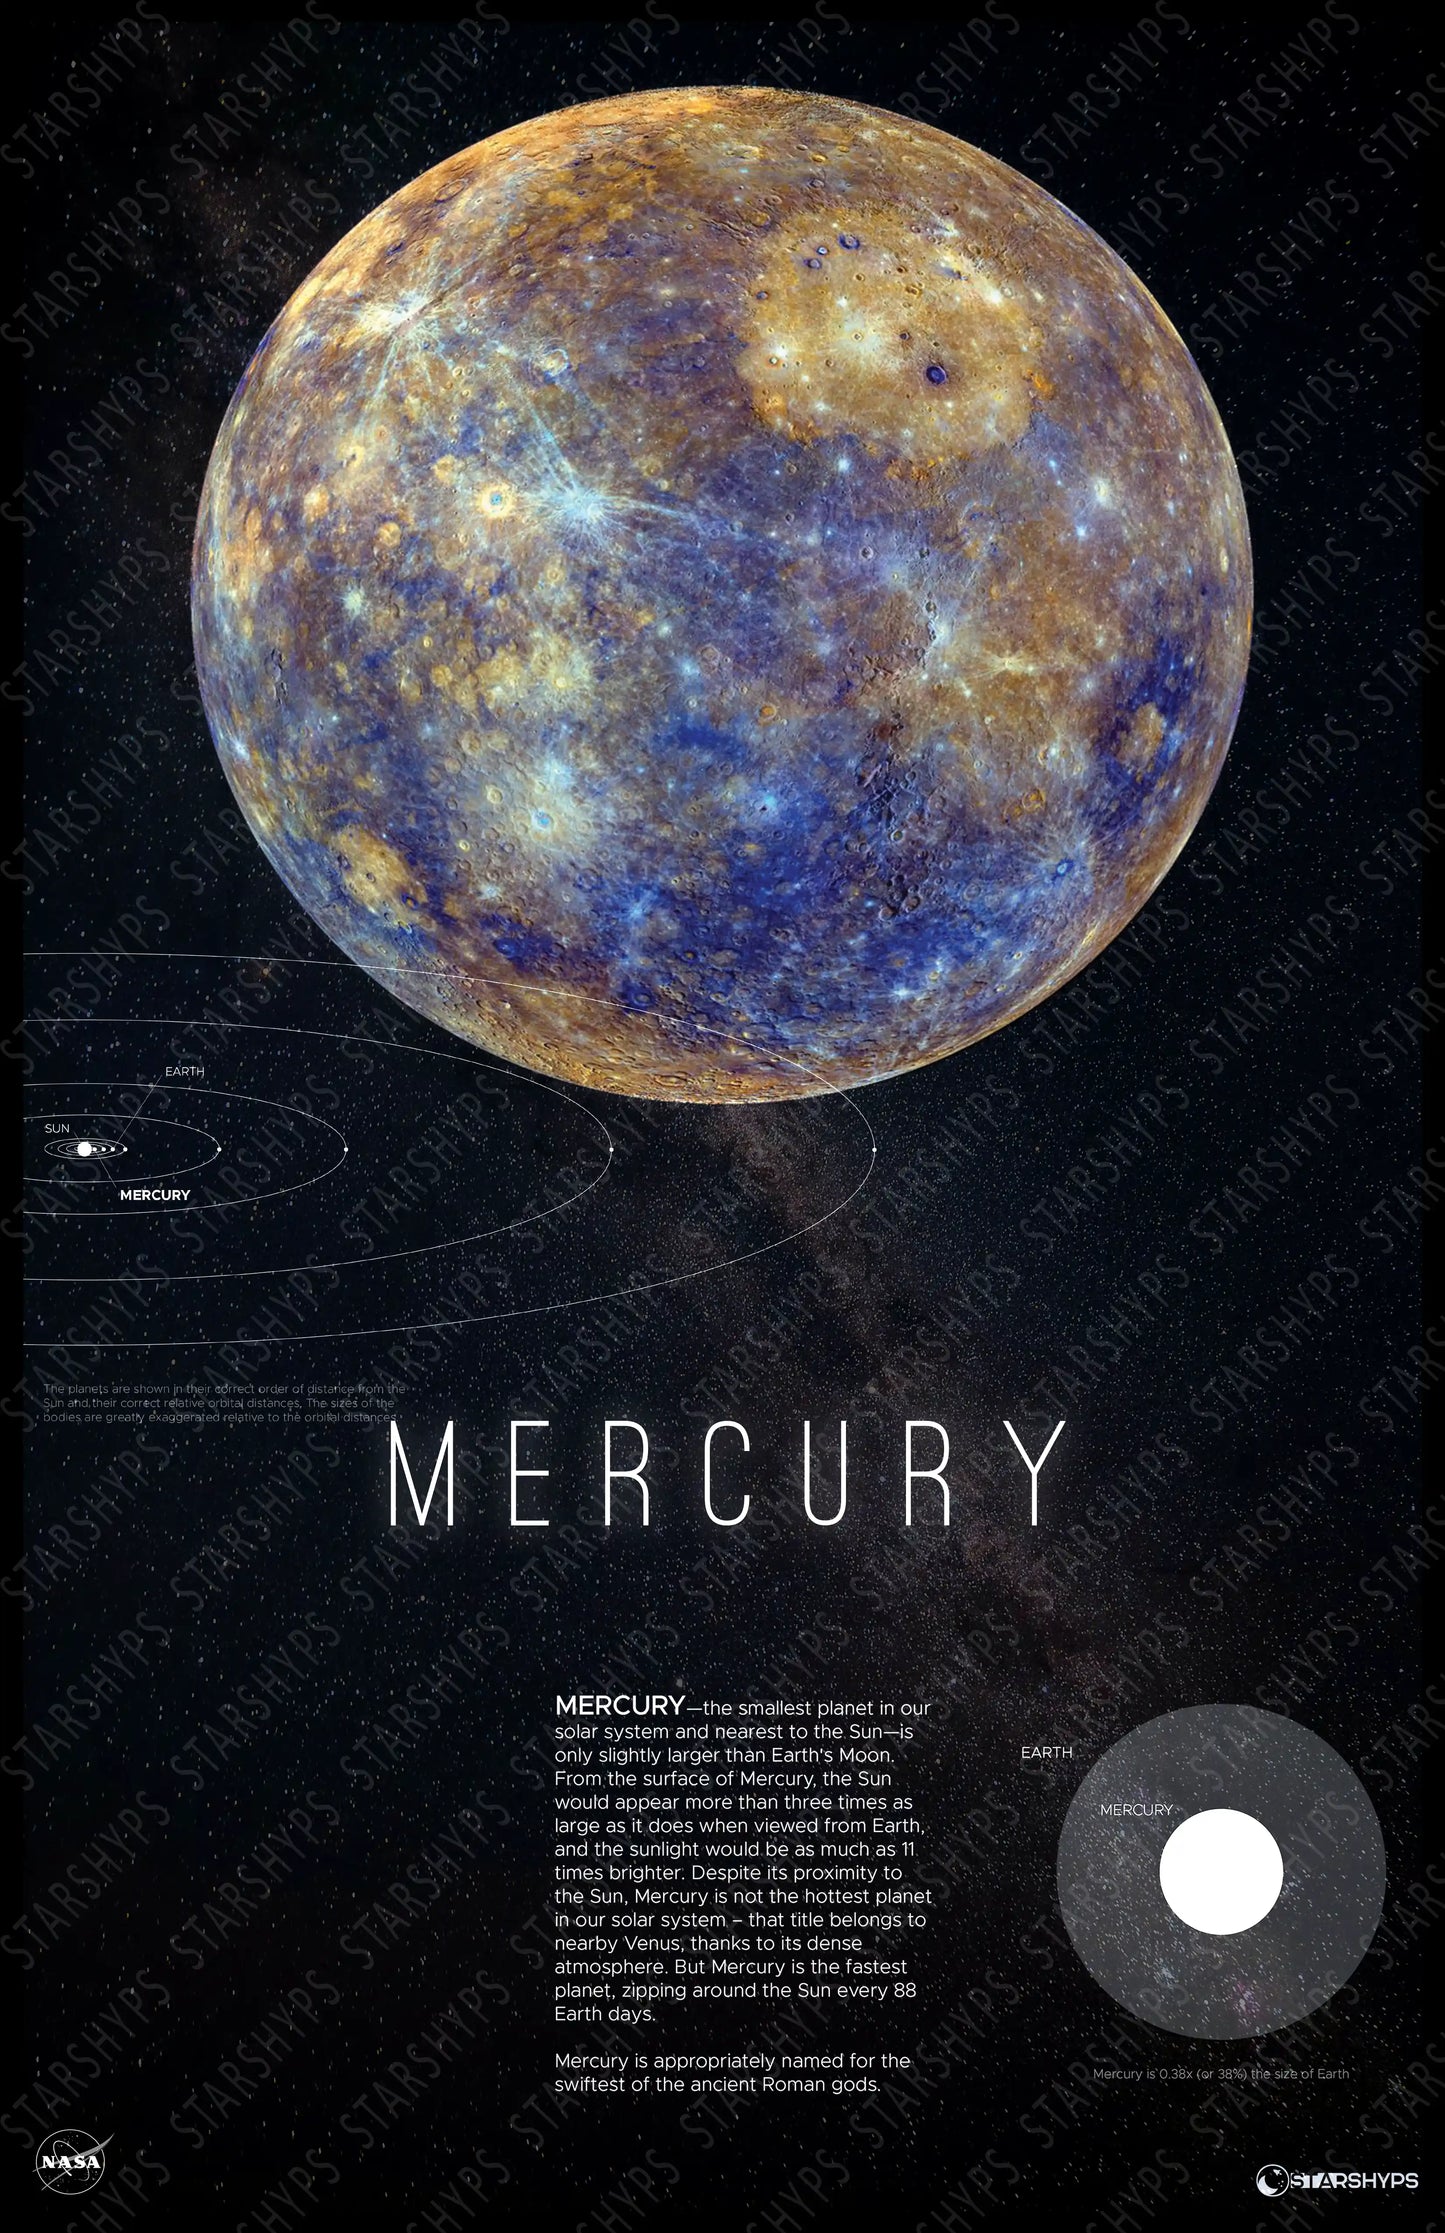 Mercury Mercurial Glow Decor | Mercury Print |Rocket Blueprint Posters | The image shows a poster of Mercury with a starry background. The poster includes a vivid image of Mercury, the title "MERCURY," informational text about the planet, and a size comparison chart with Earth.